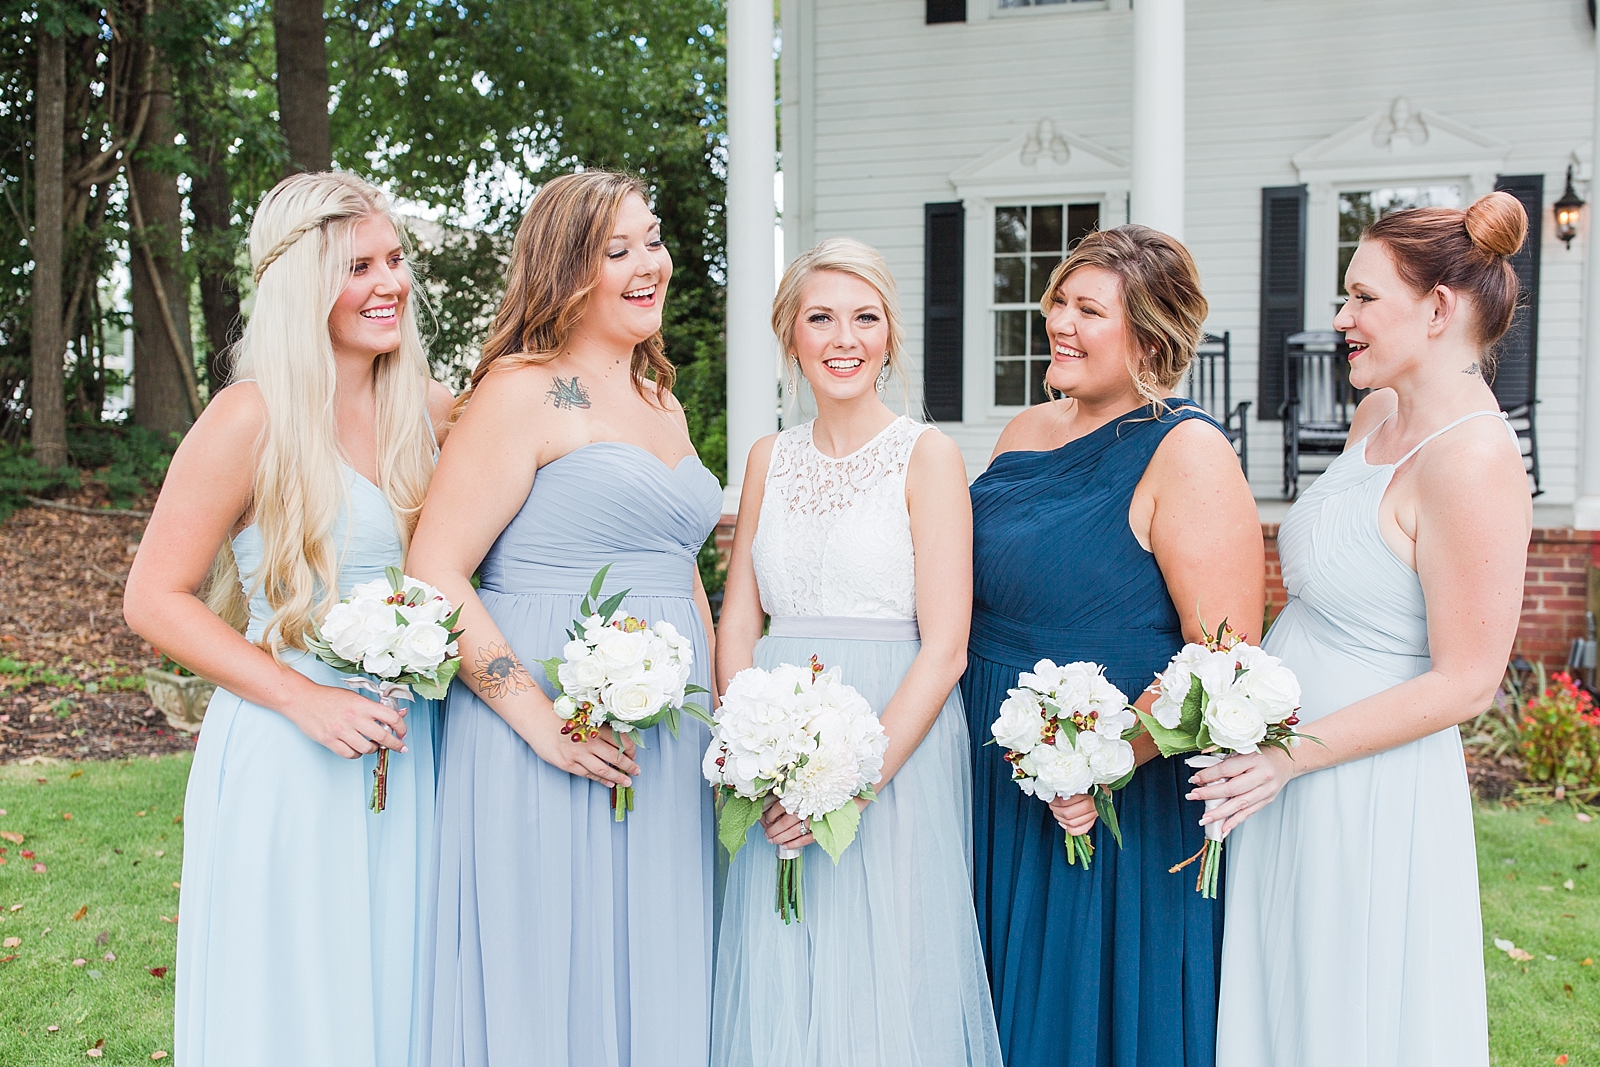 Dahlonega Wedding Venue Bride with Bridesmaids smiling and Laughing Photo